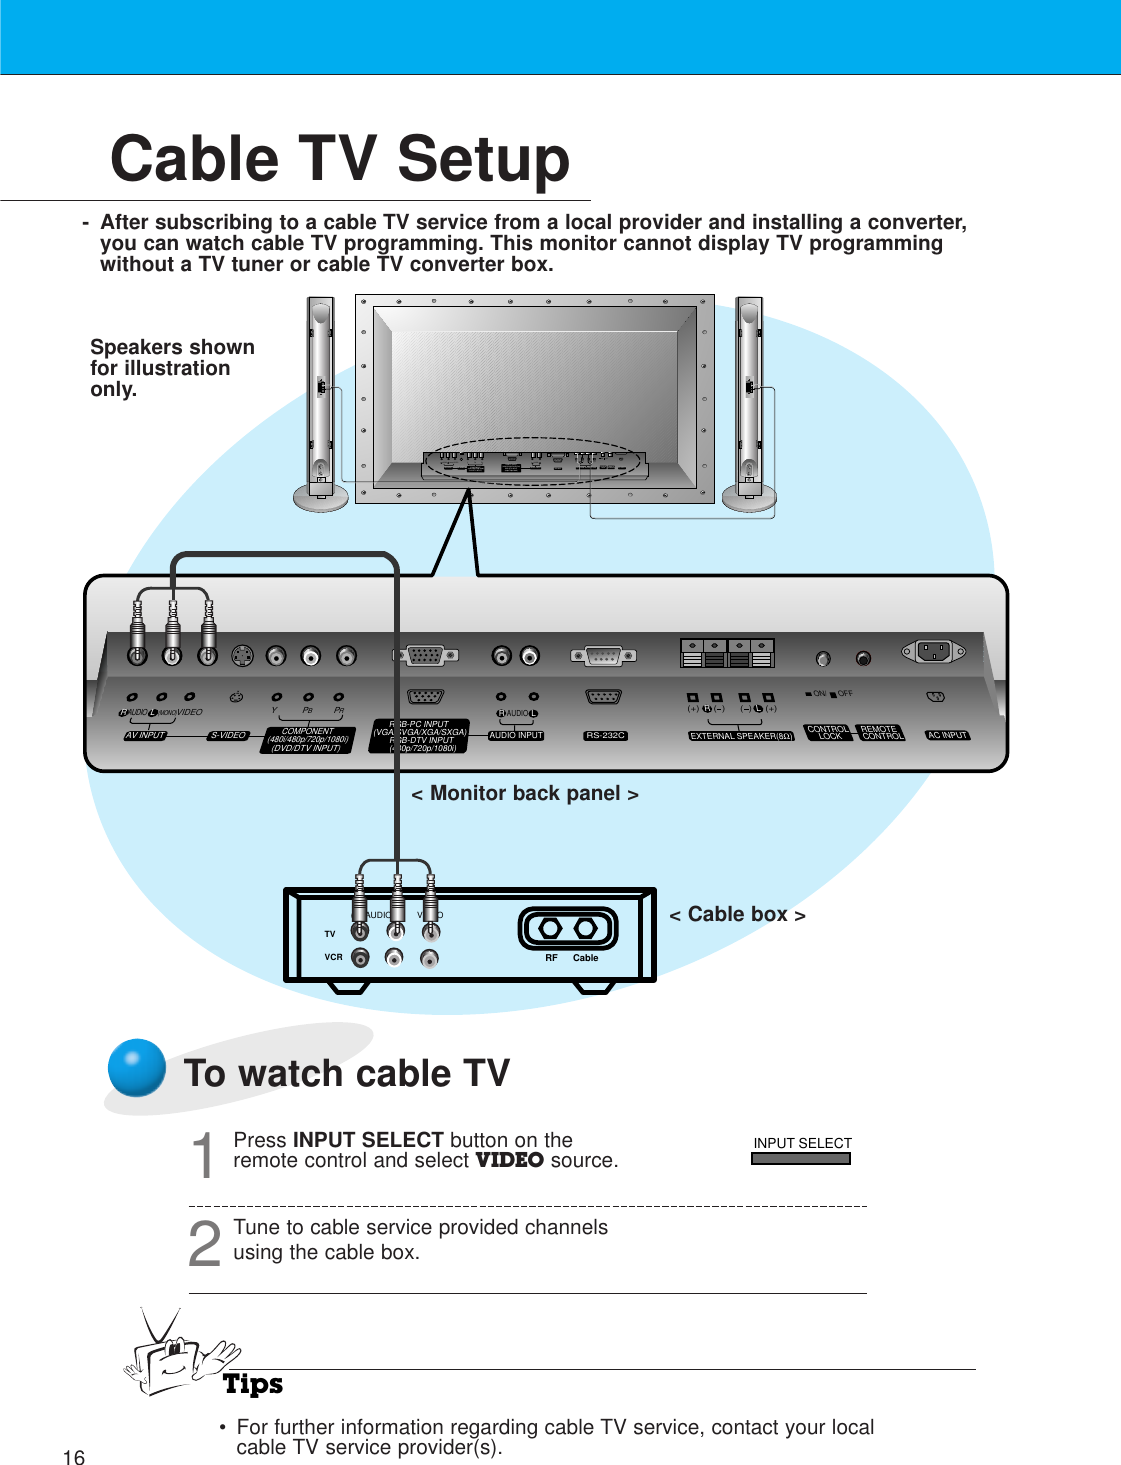 16Cable TV Setup- After subscribing to a cable TV service from a local provider and installing a converter,you can watch cable TV programming. This monitor cannot display TV programmingwithout a TV tuner or cable TV converter box.TVVCR RF Cable (R) AUDIO (L) VIDEO(+) (  ) (+)(  )AUDIO(MONO)R L VIDEO Y PB RPAV INPUTAUDIOON/ OFFR L RLEXTERNAL SPEAKER (8Ω) AC INPUTAUDIO INPUTS-VIDEO COMPONENT(480i/480p/720p/1080i)RGB-PC INPUT(VGA/SVGA/XGA/SXGA)RGB-DTV INPUT(480p/720p/1080i)(DVD/DTV INPUT)(+) (  ) (+)(  )AUDIO(MONO)R LAV INPUT S-VIDEOCOMPONENT(480i/480p/720p/1080i)(DVD/DTV INPUT)RGB-PC INPUTRAUDIO INPUTEXTERNAL SPEAKER(8Ω)R LAC INPUTLAUDIO(VGA/SVGA/XGA/SXGA)RGB-DTV INPUT(480p/720p/1080i)VIDEO YPBPRRS-232CRS-232CCONTROLLOCK REMOTECONTROLREMOTECONTROLCONTROLLOCKON/ OFFTo watch cable TVPress INPUT SELECT button on theremote control and select VIDEO source.1Tune to cable service provided channelsusing the cable box.2Tips•For further information regarding cable TV service, contact your localcable TV service provider(s).&lt; Monitor back panel &gt;&lt; Cable box &gt;Speakers shownfor illustrationonly.INPUT SELECT